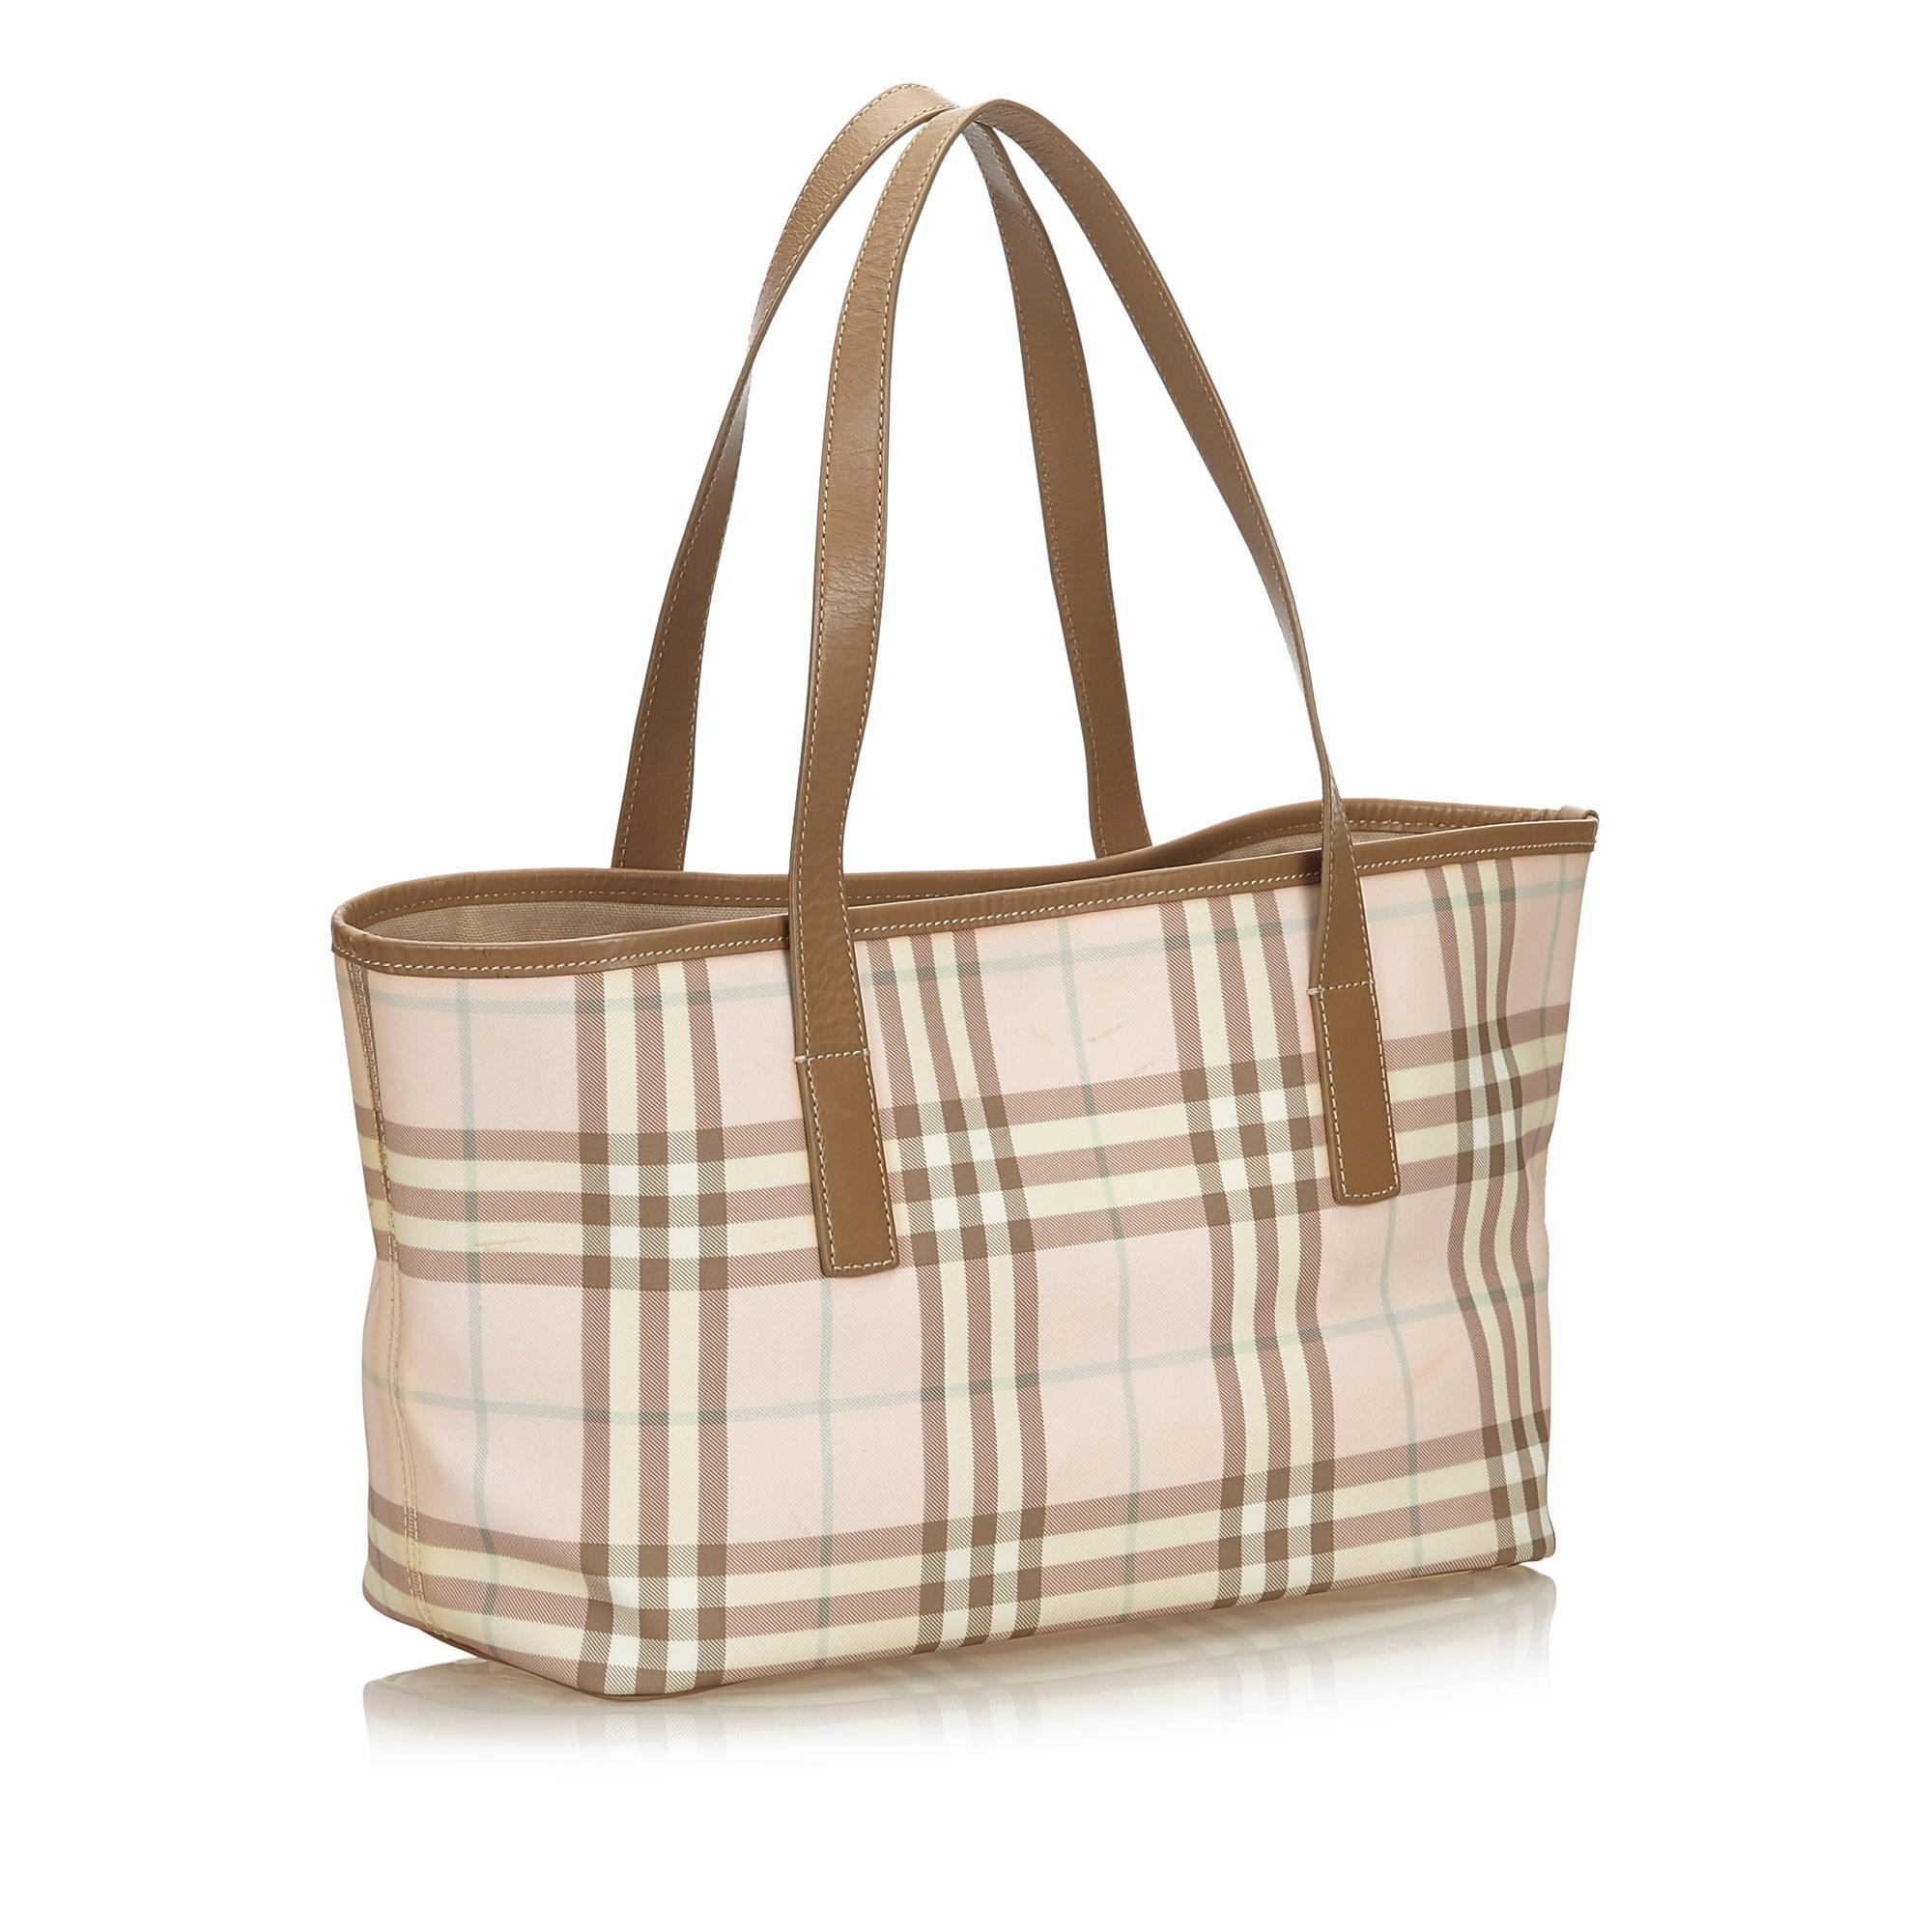 This tote bag features a plaid jacquard body with leather trim, flat leather straps, open top with magnetic snap button closure, and interior zip and slip pockets. It carries as B+ condition rating.

Inclusions: 
This item does not come with